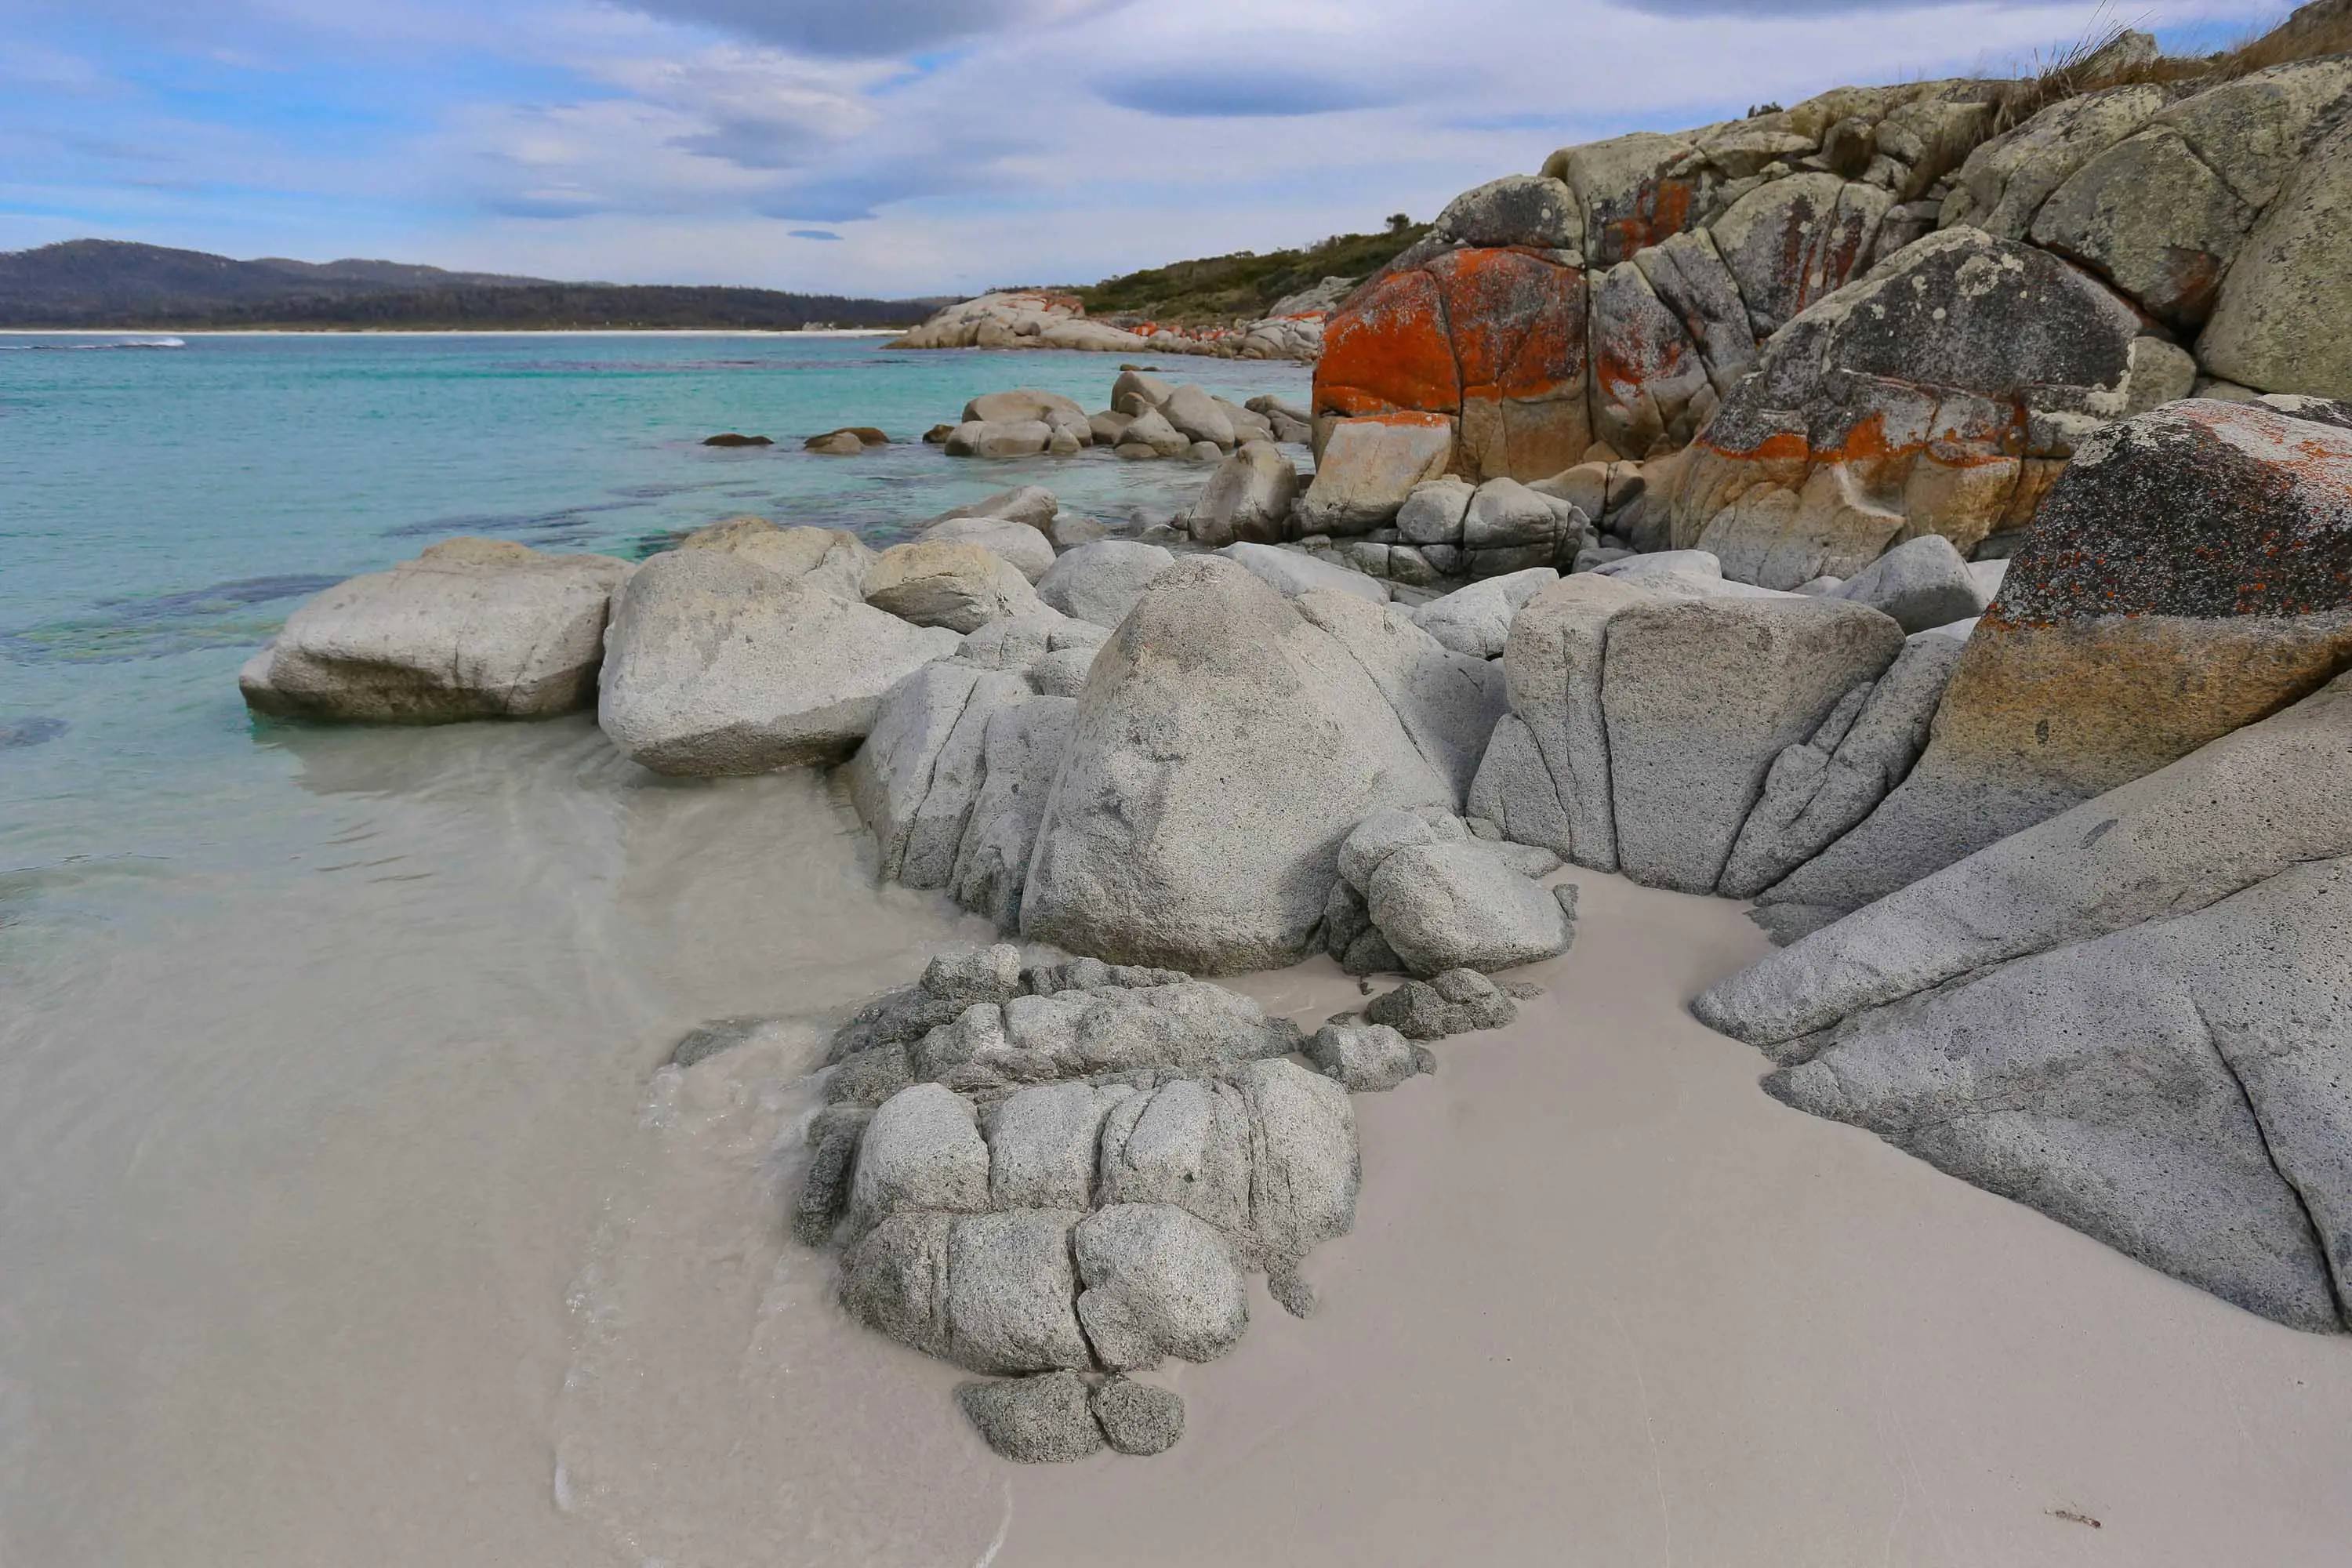 White rocks capped with orange lichen lead into the light blue waters on the east coast of Tasmania.